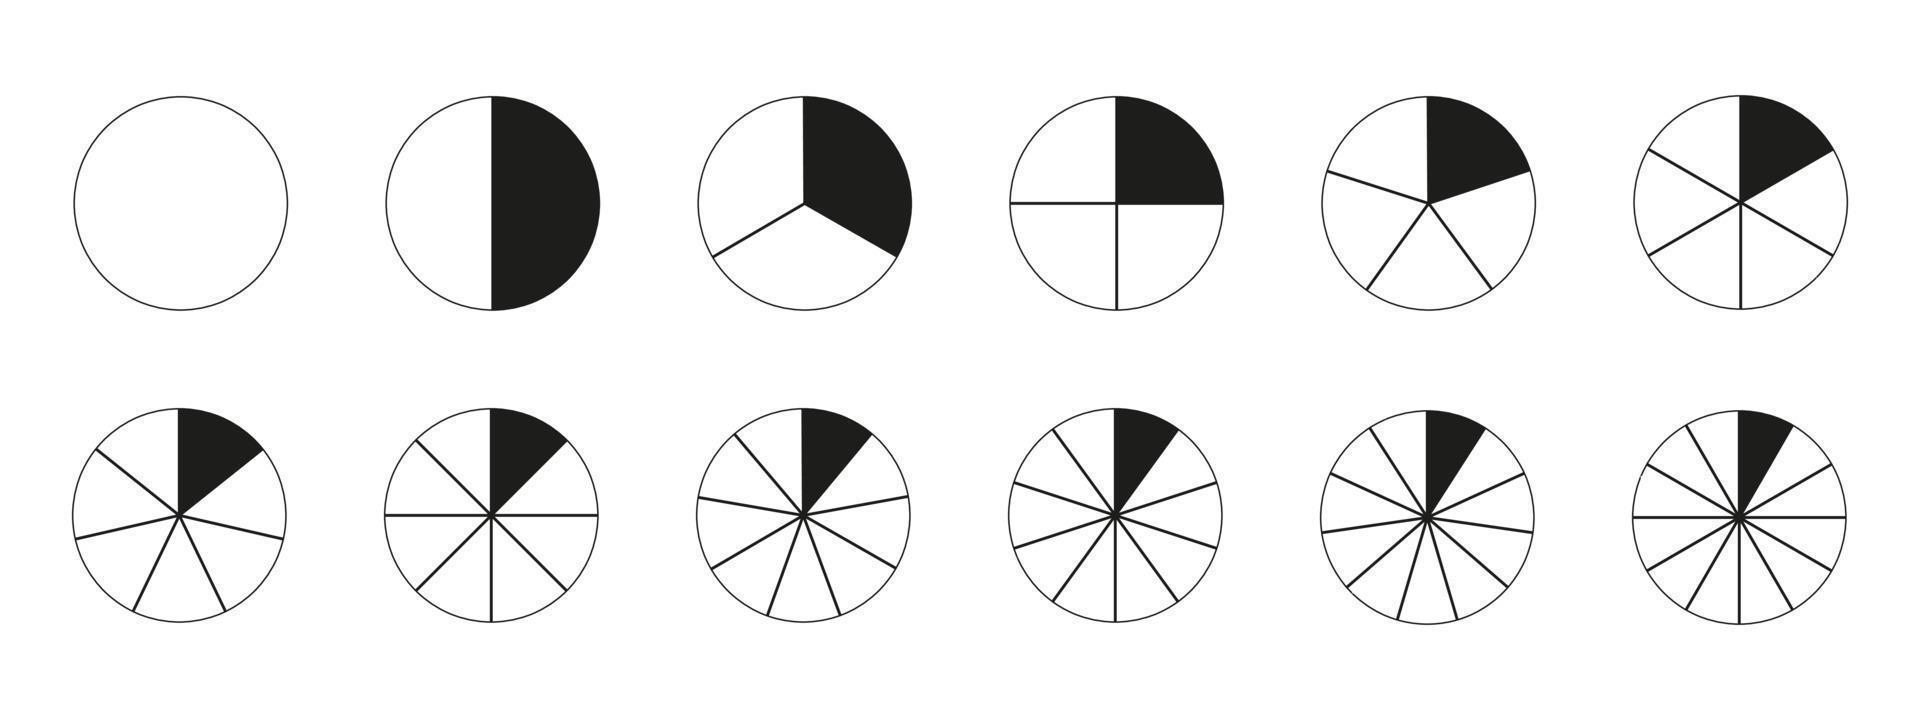 Segment slice icon. Pie chart template. Circle section graph line art. 1,2,3,4,5,6,7,8,9,10,11,12 segments infographic with one painted segment. Diagram wheel parts. Geometric element. vector